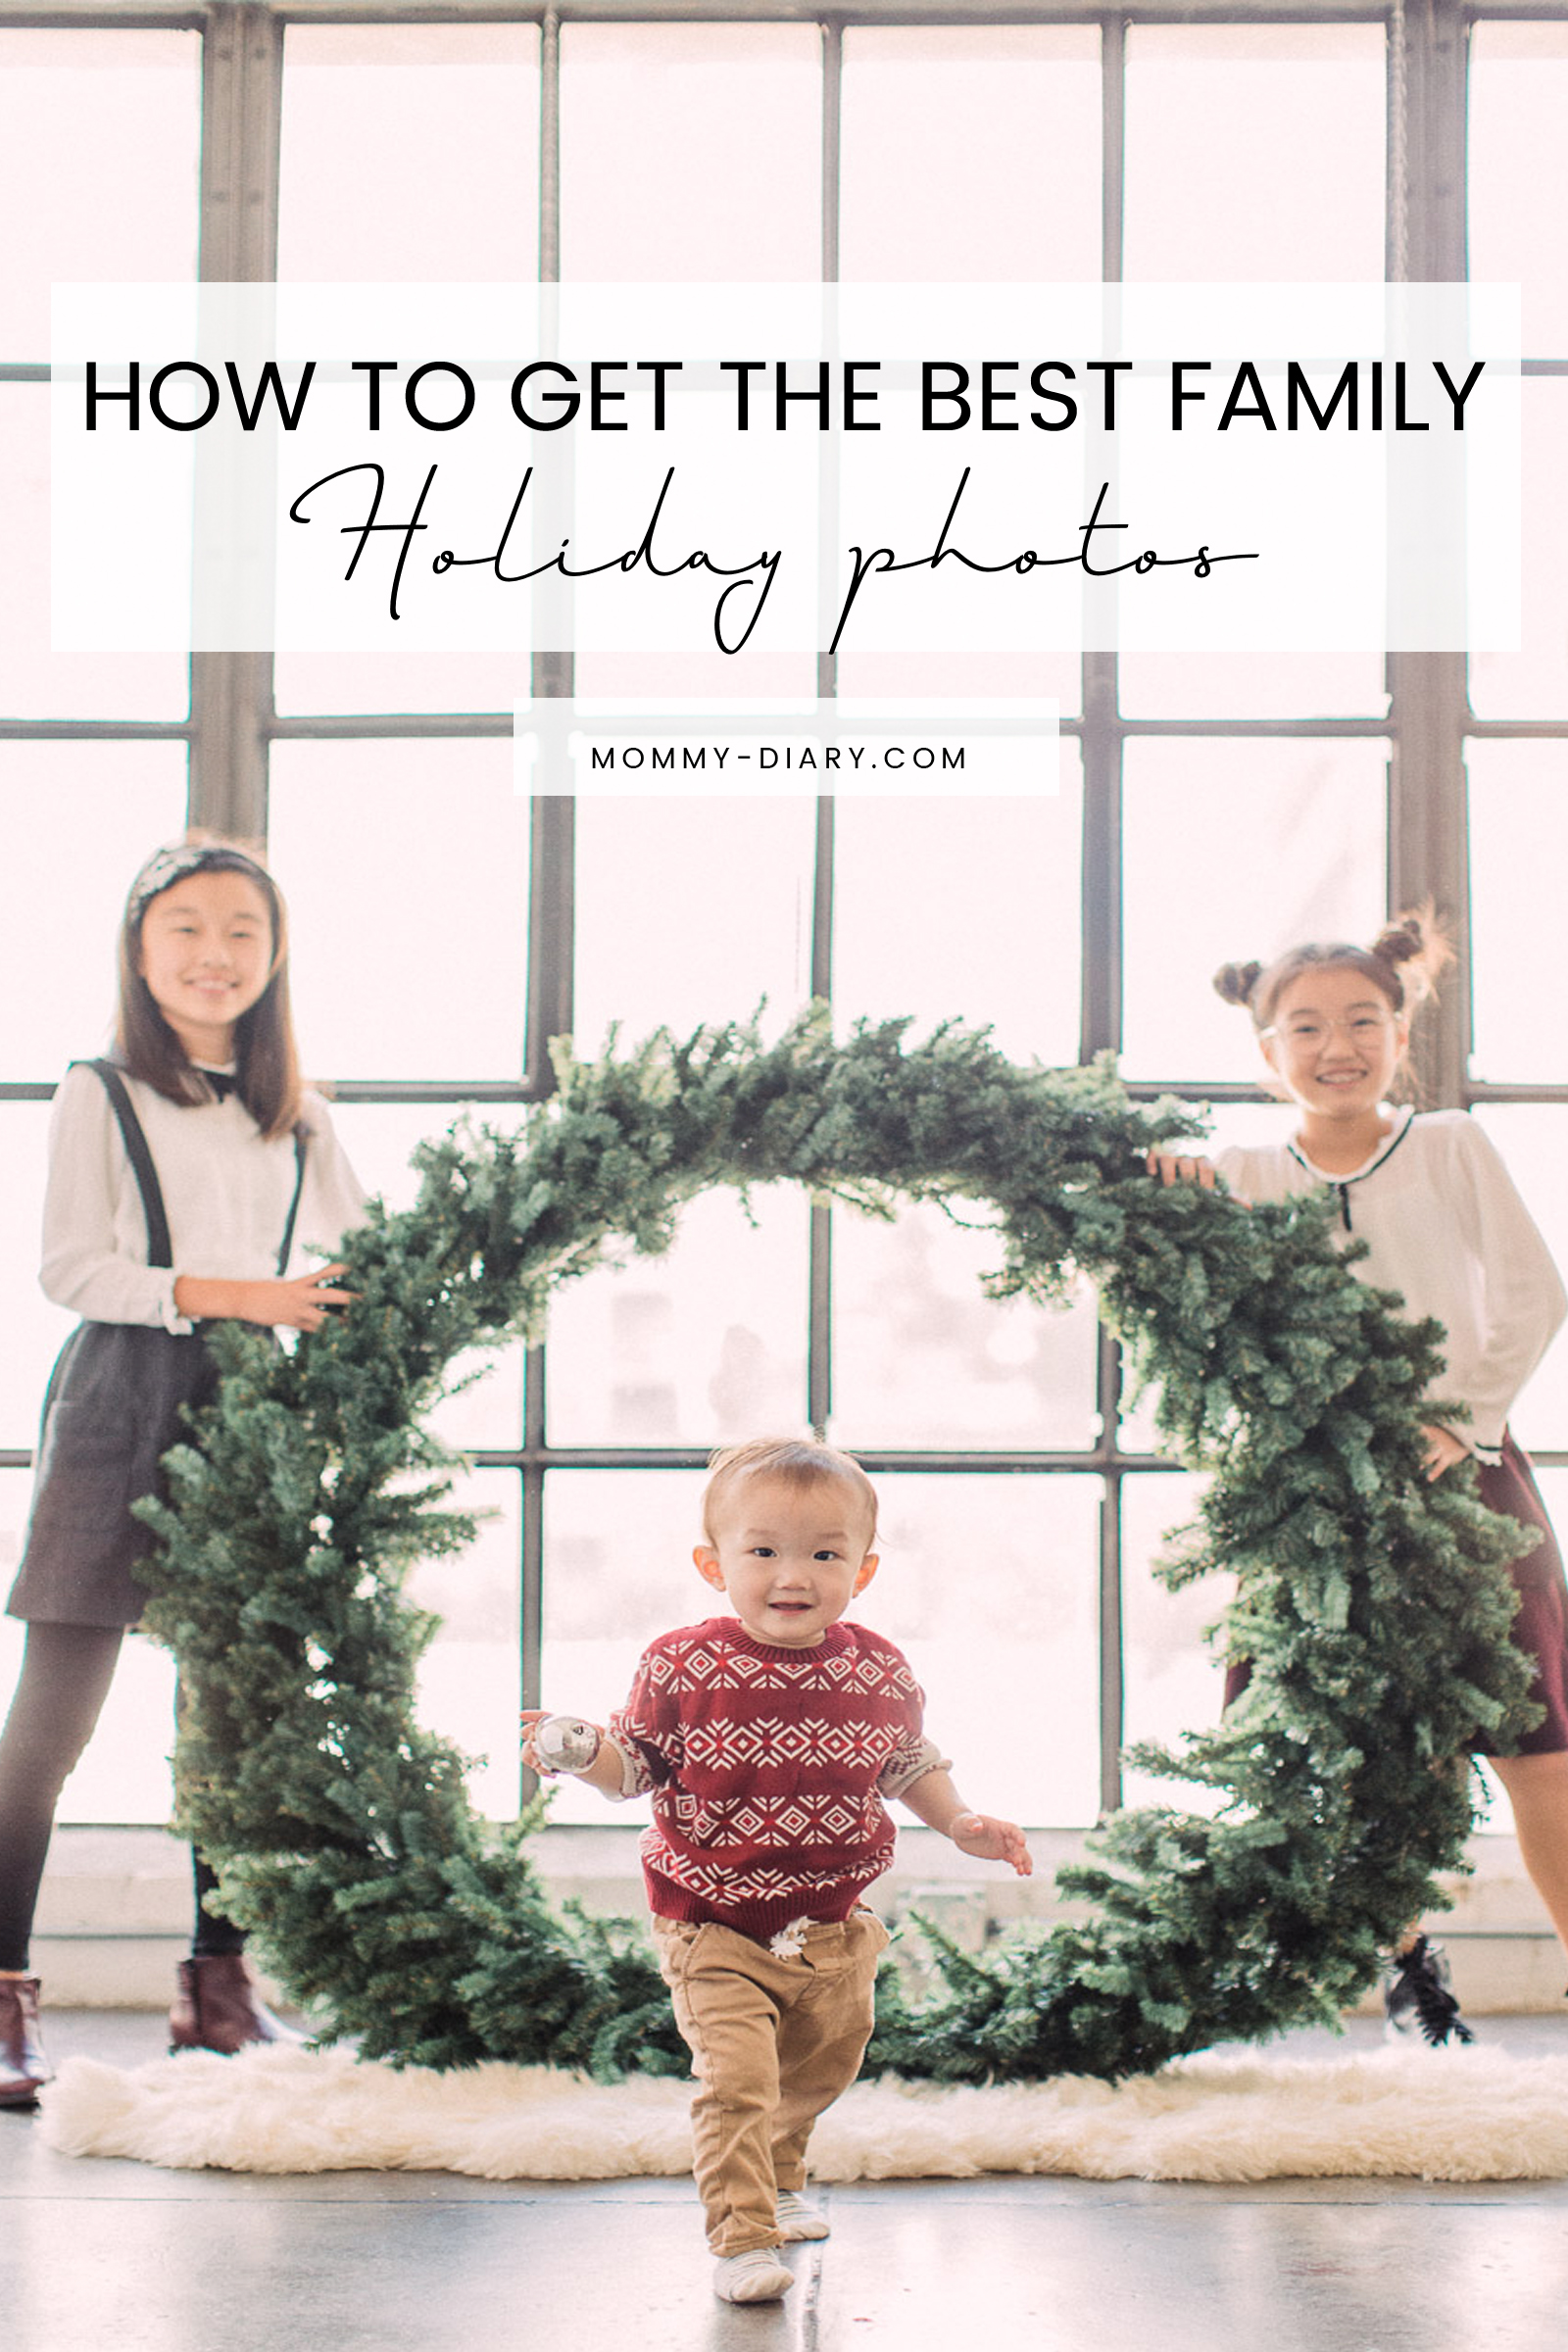 how-to-get-best-family-holiday-photos-cover